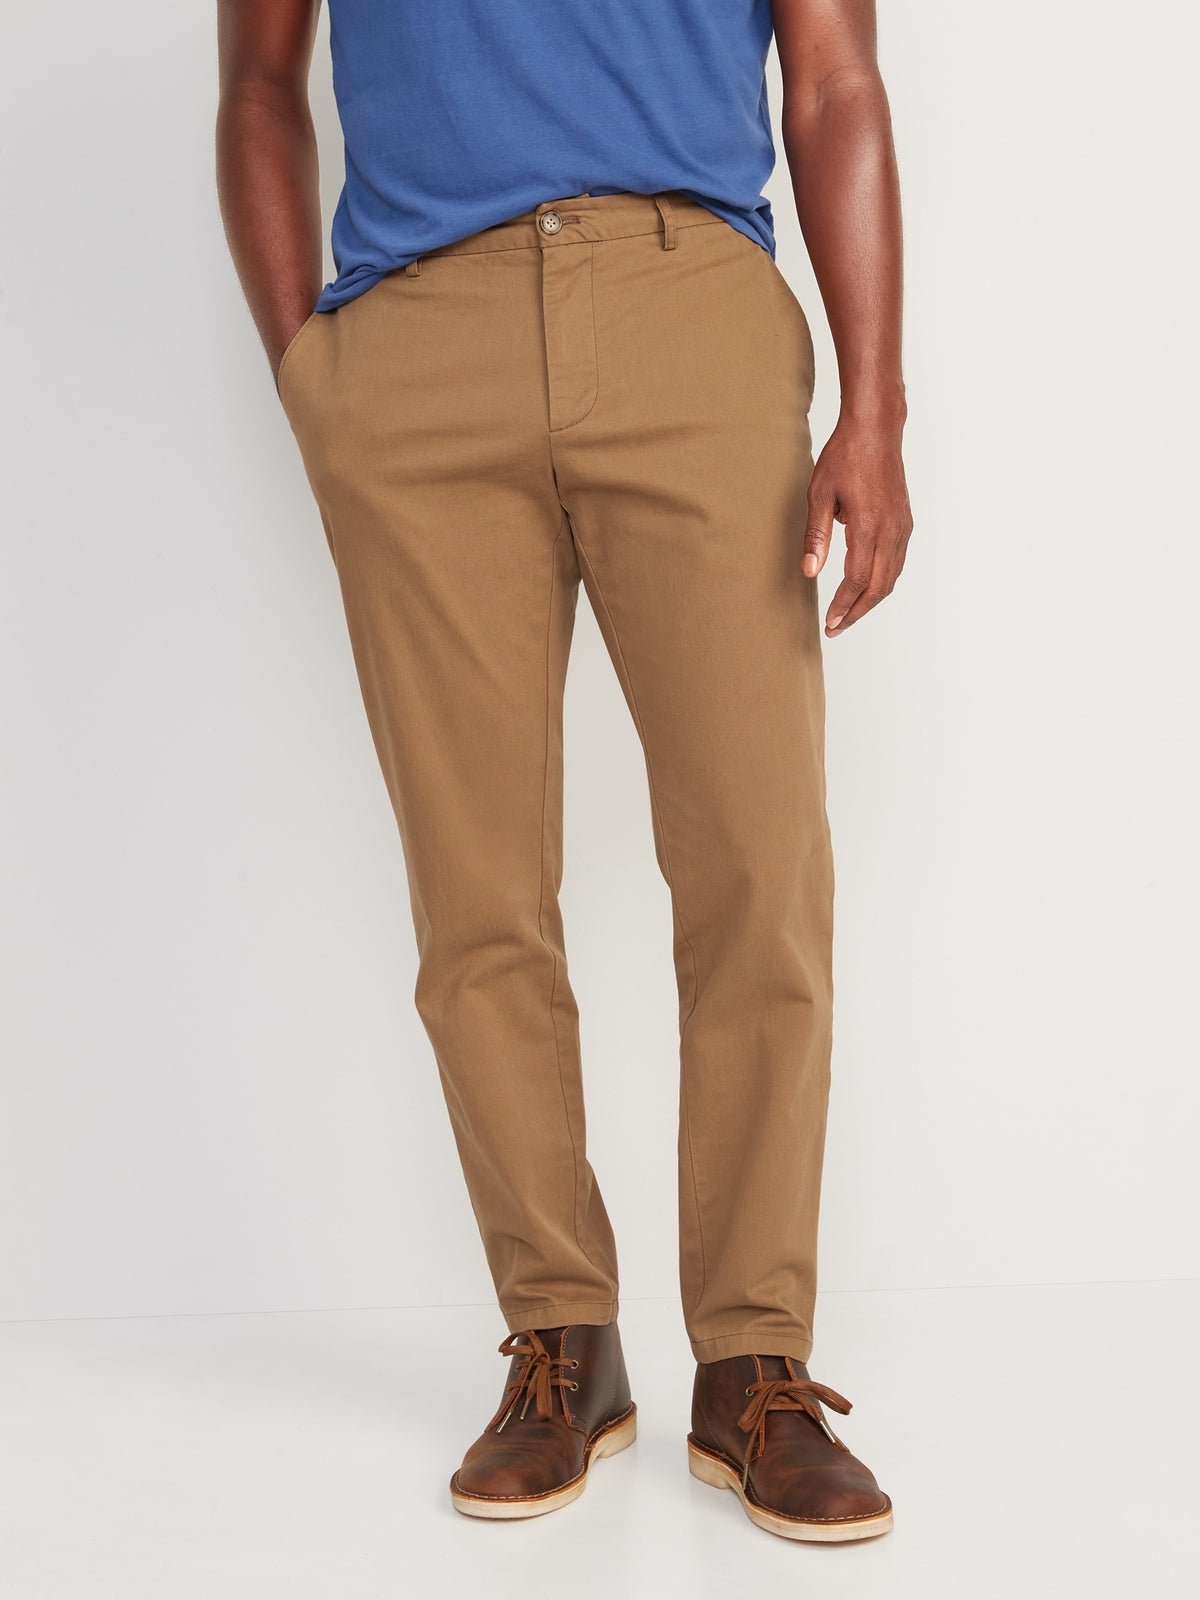 ONLINE EXCLUSIVE_Athletic Built-In Flex Rotation Chino Pants for Men_Doe-A-Deer_2450.jpeg